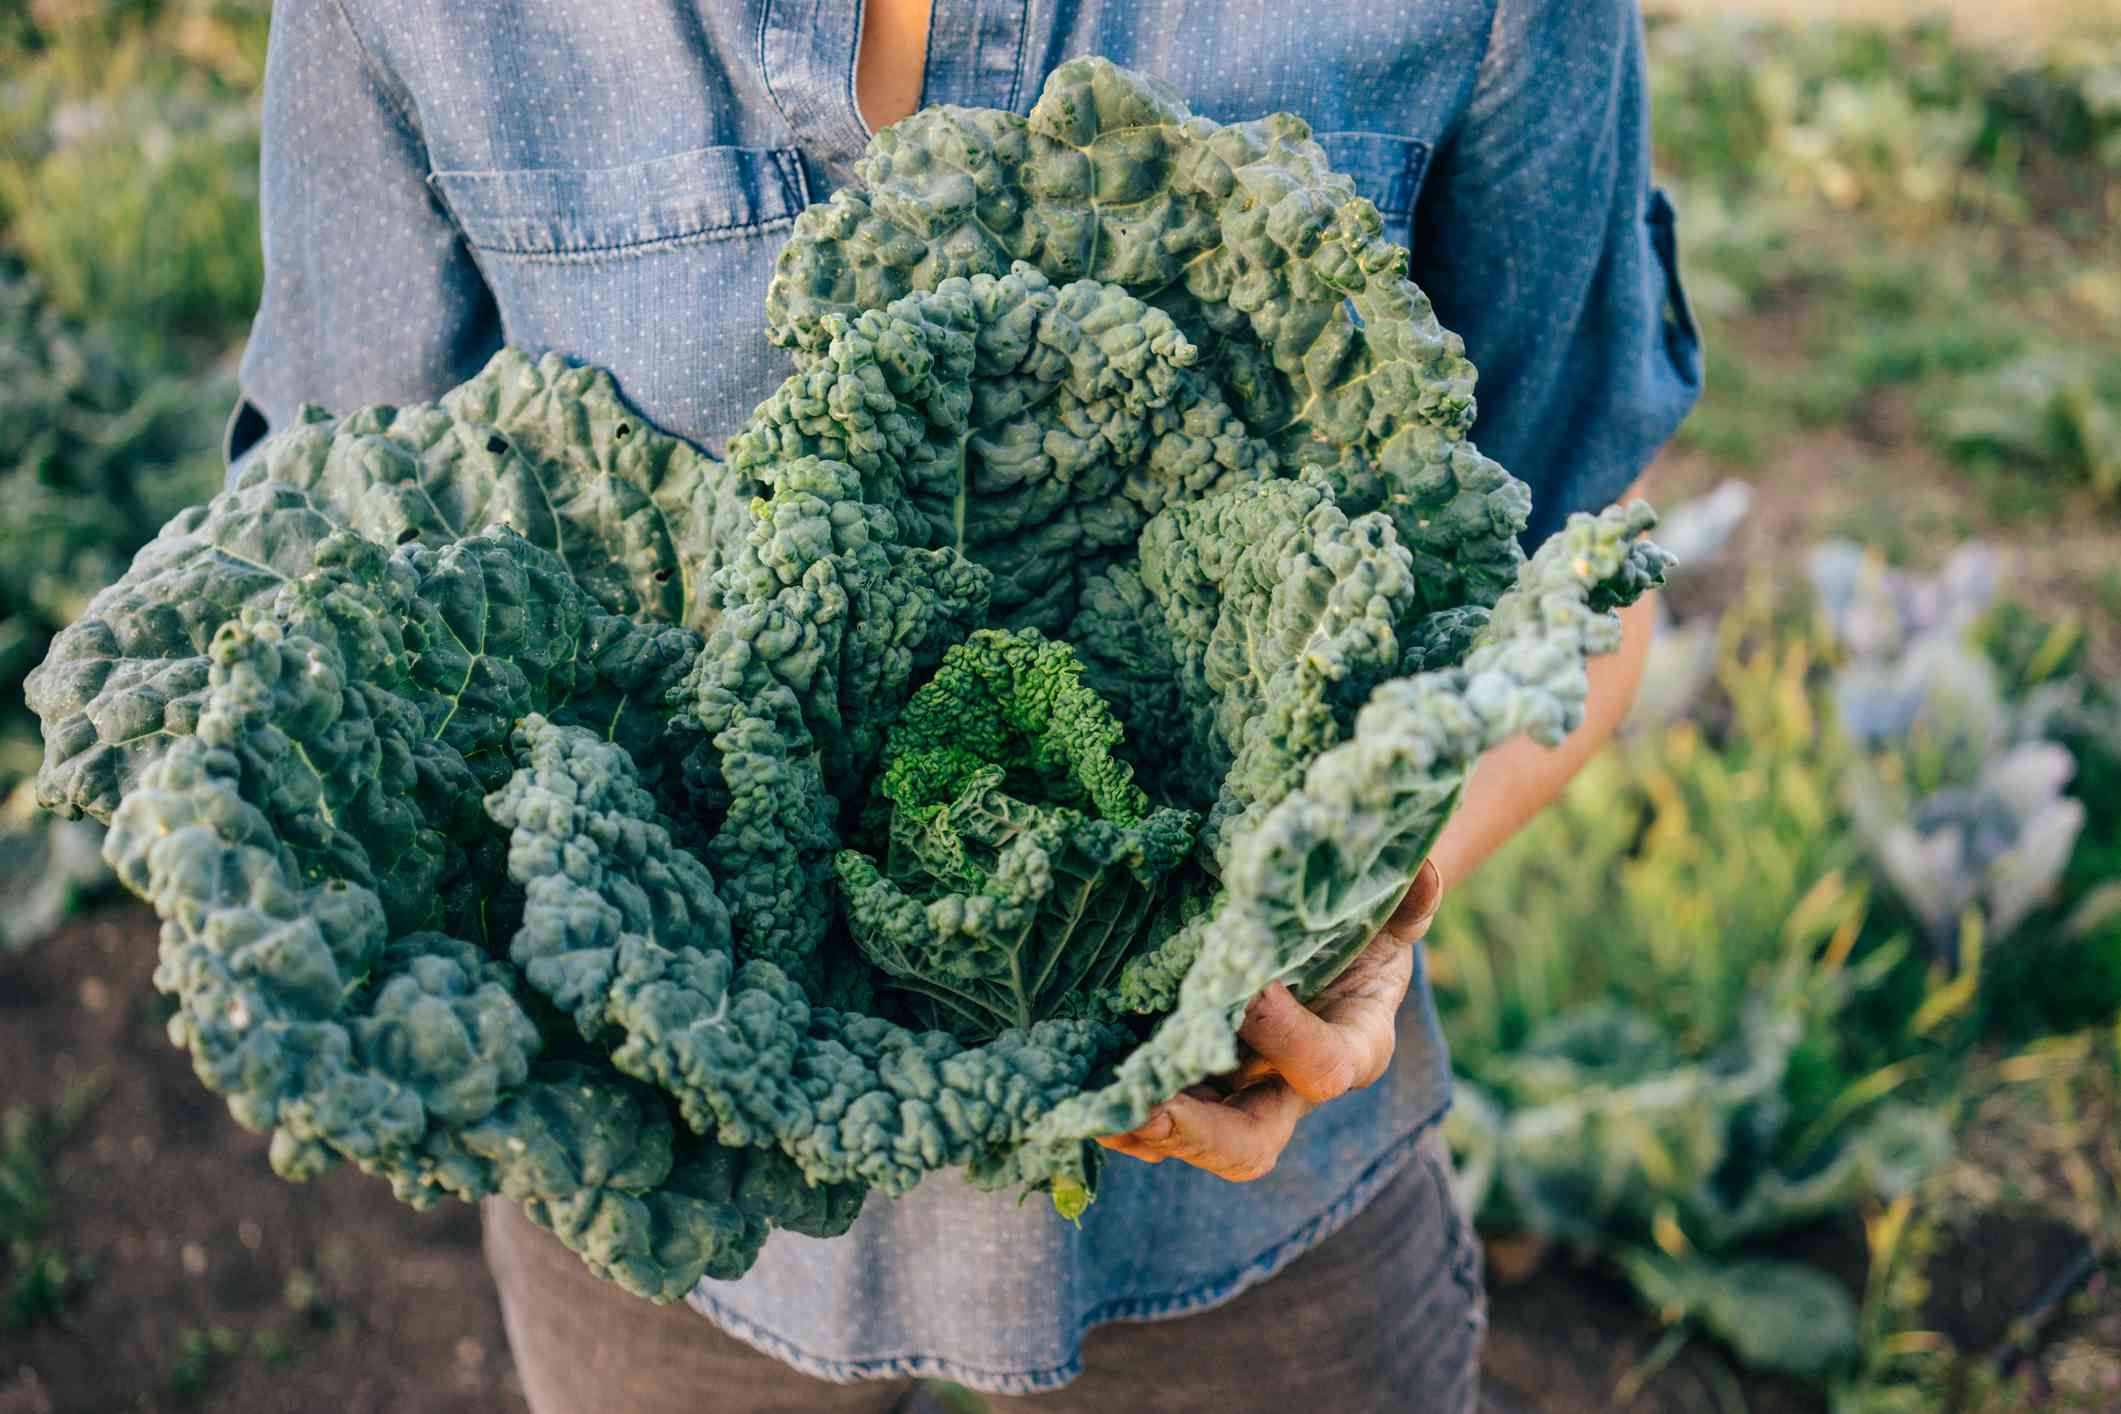 Another health benefit of kale is its high fiber content. Fiber is essential for healthy digestion and can help prevent constipation and promote regular bowel movements. It also helps control blood sugar levels and can aid in weight management.